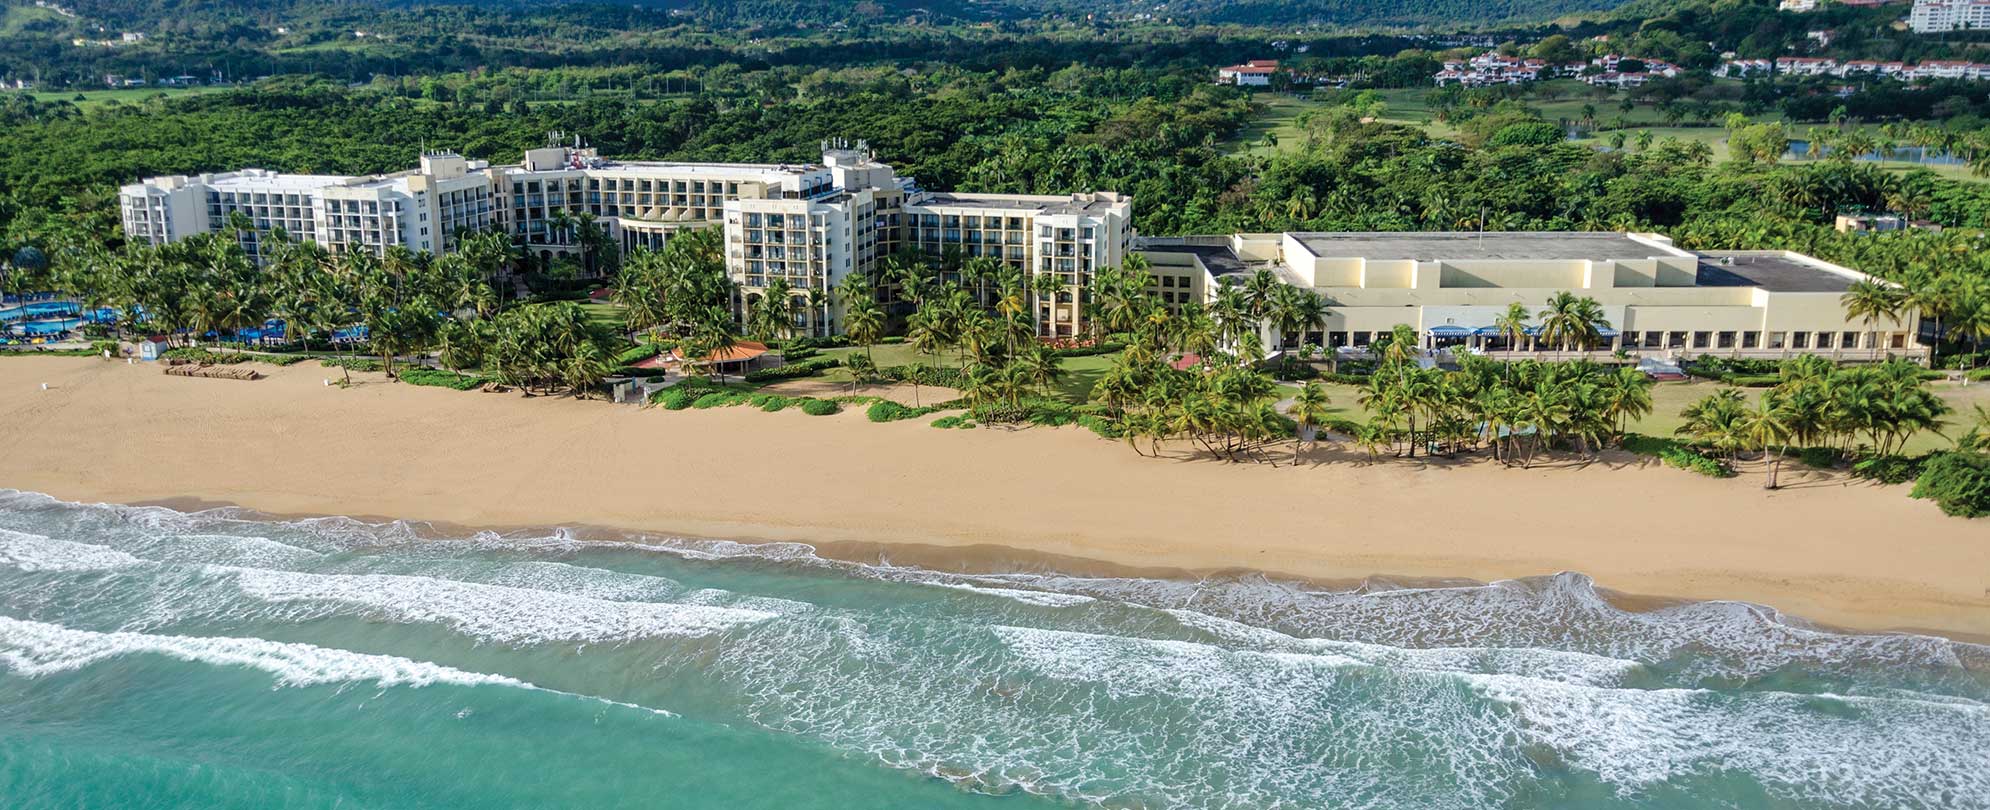 Birds-eye-view of Margaritaville Vacation Club by Wyndham - Rio Mar, an oceanfront timeshare resort in Puerto Rico.